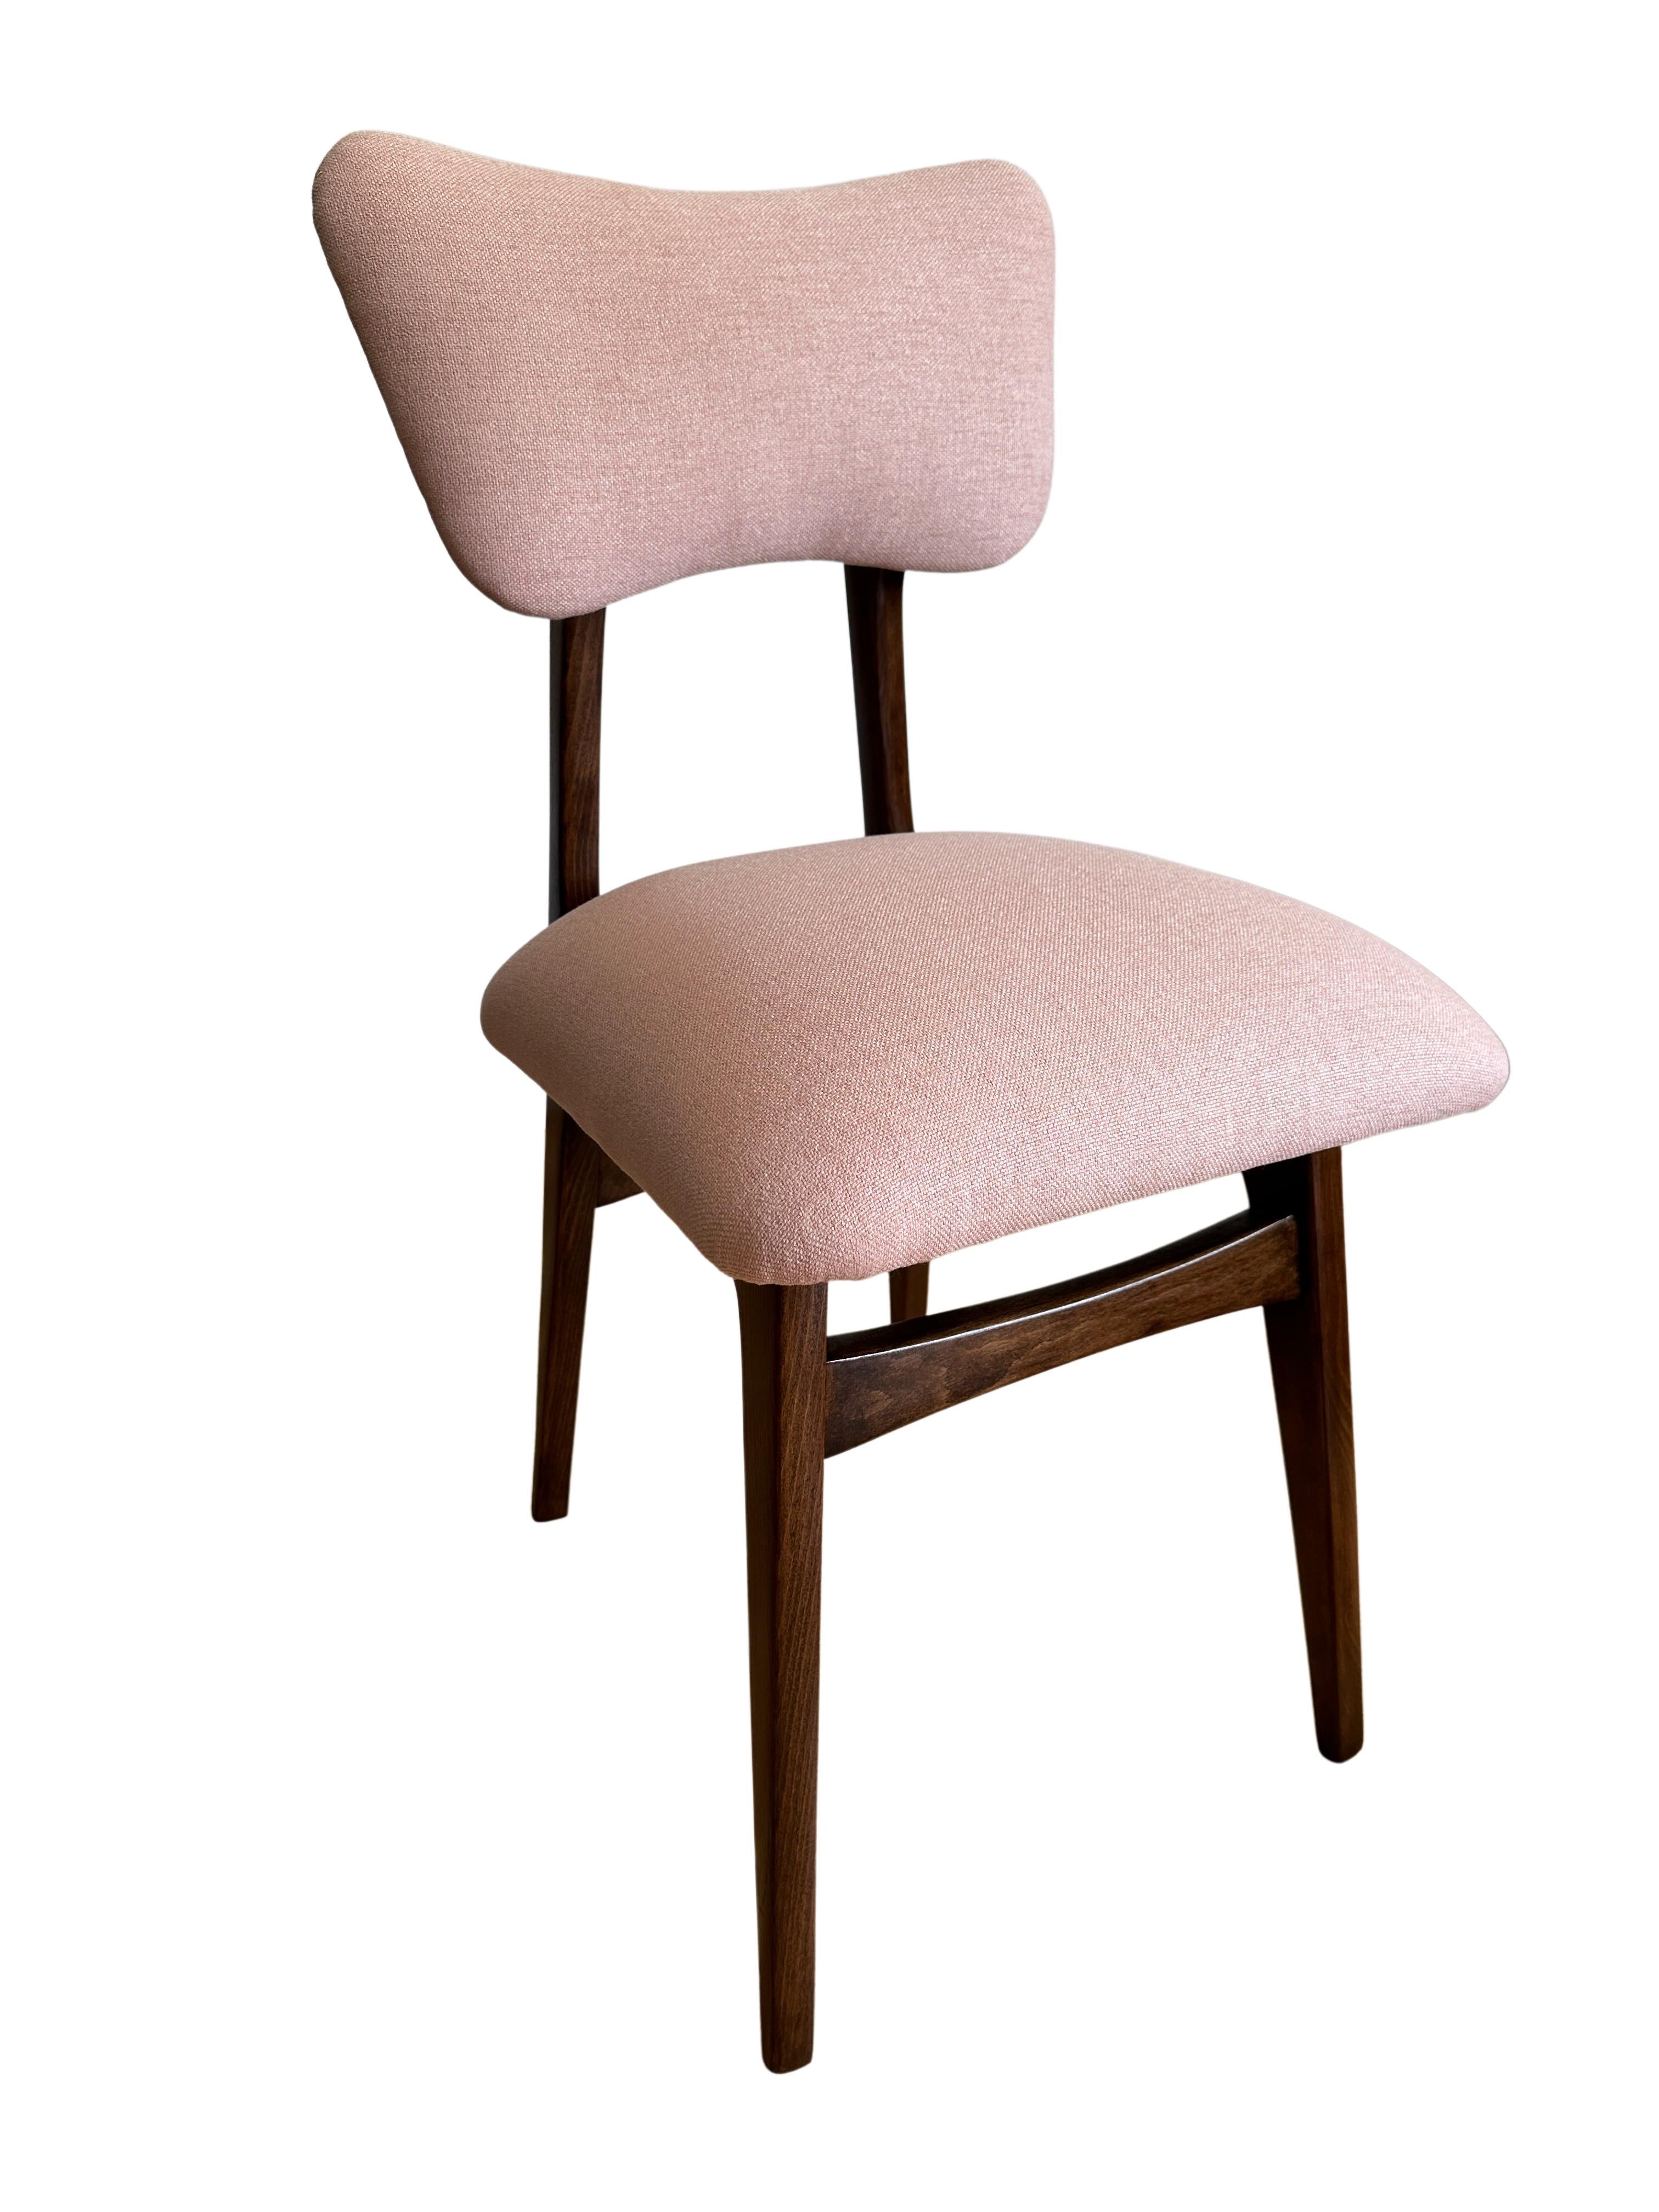 Set of 6 Midcentury Light Pink Dining Chairs, Europe, 1960s For Sale 2